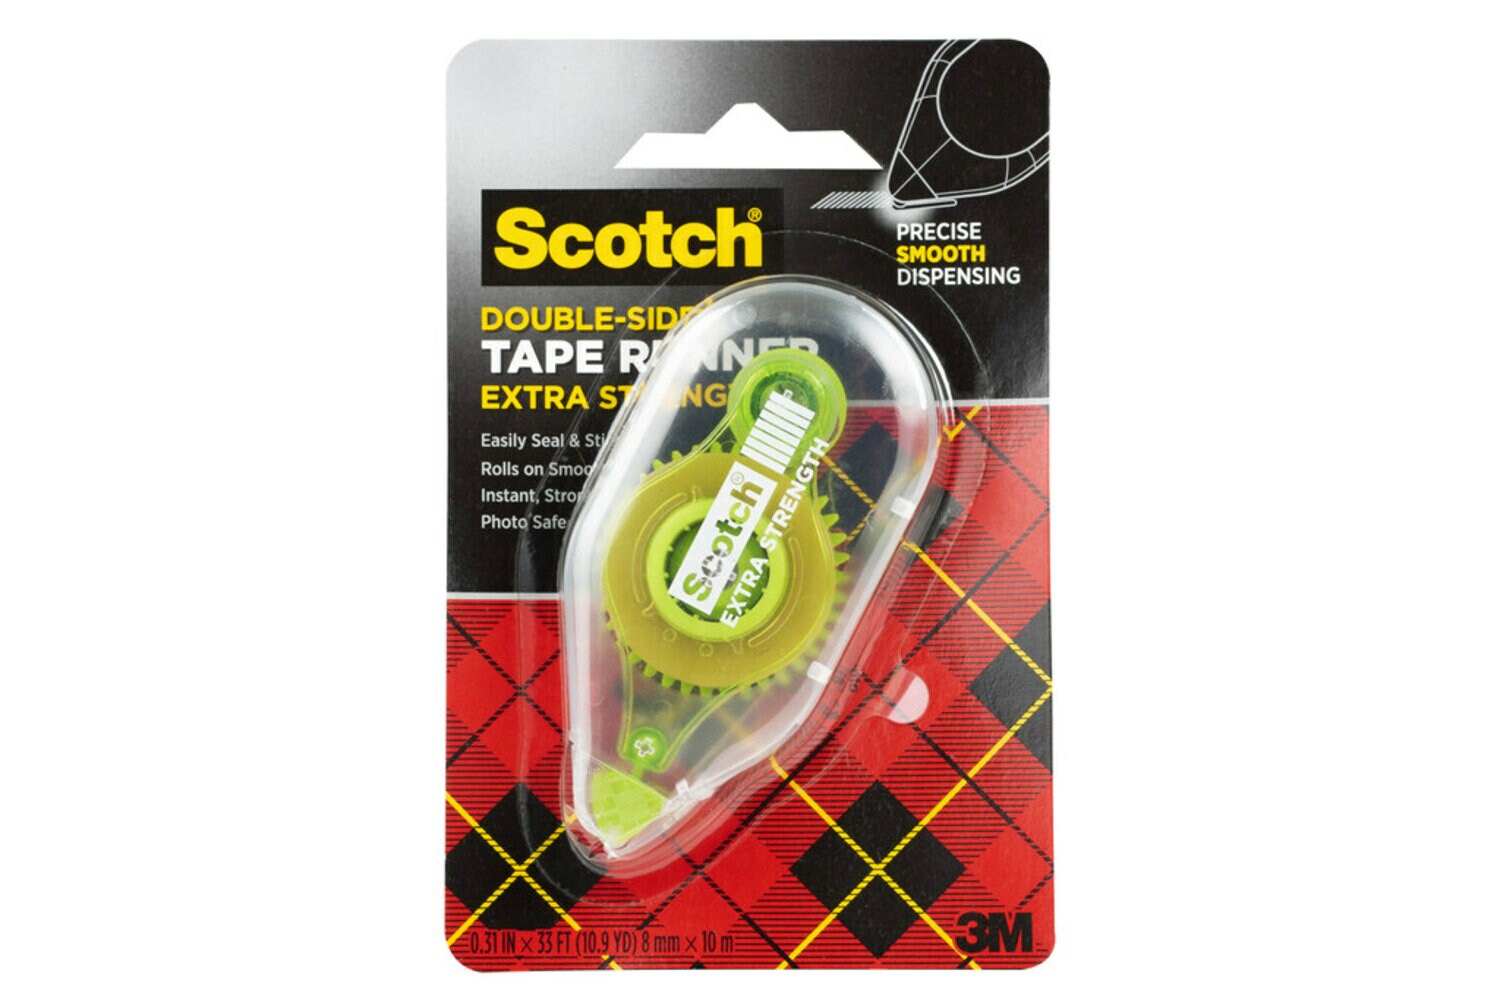 7100271439 - Scotch Tape Runners 6055BNS, .31 in x 16.3 yd (7.92 mm x 14.9 m), Value Pack, 4 Pack